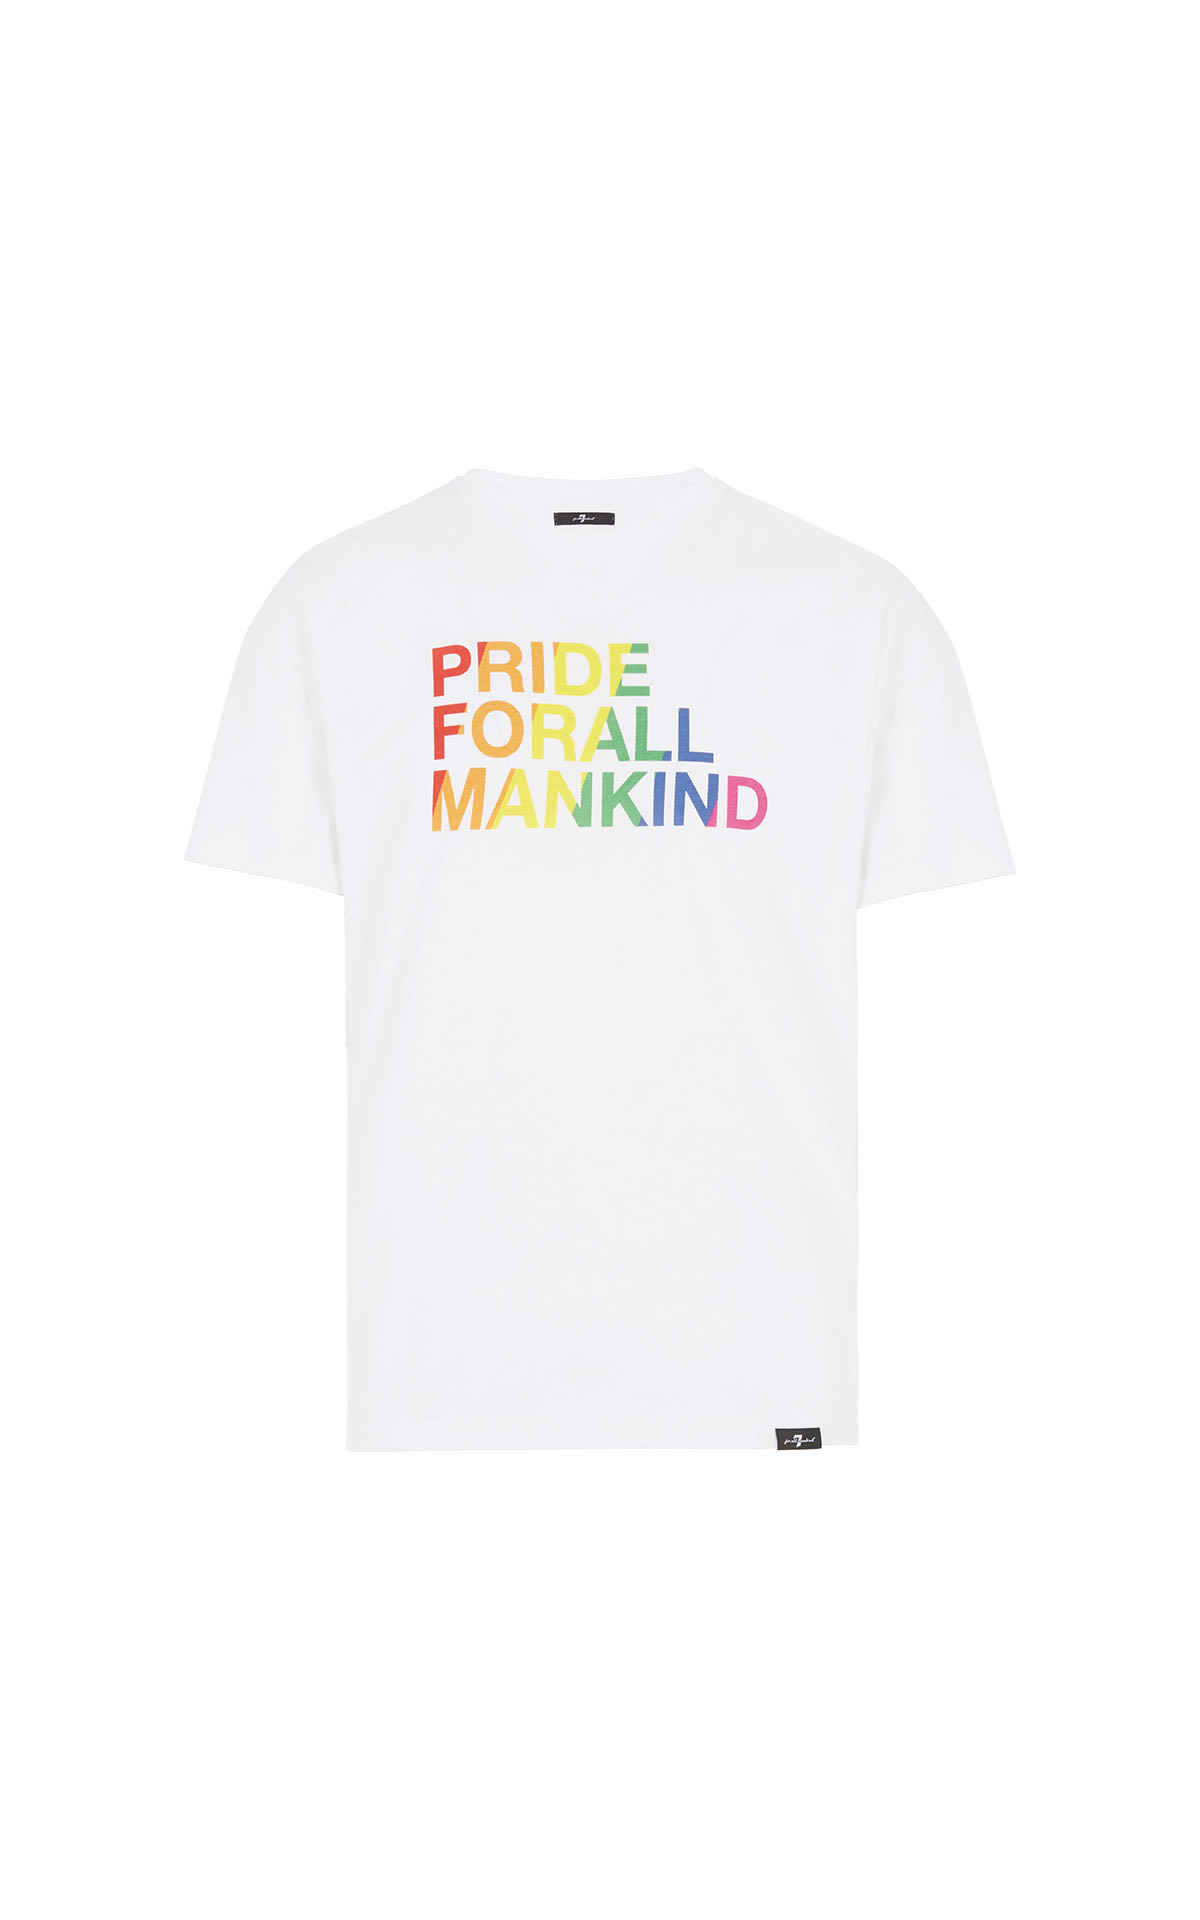 7 For all Mankind Graphic tee jersey for Pride from Bicester Village